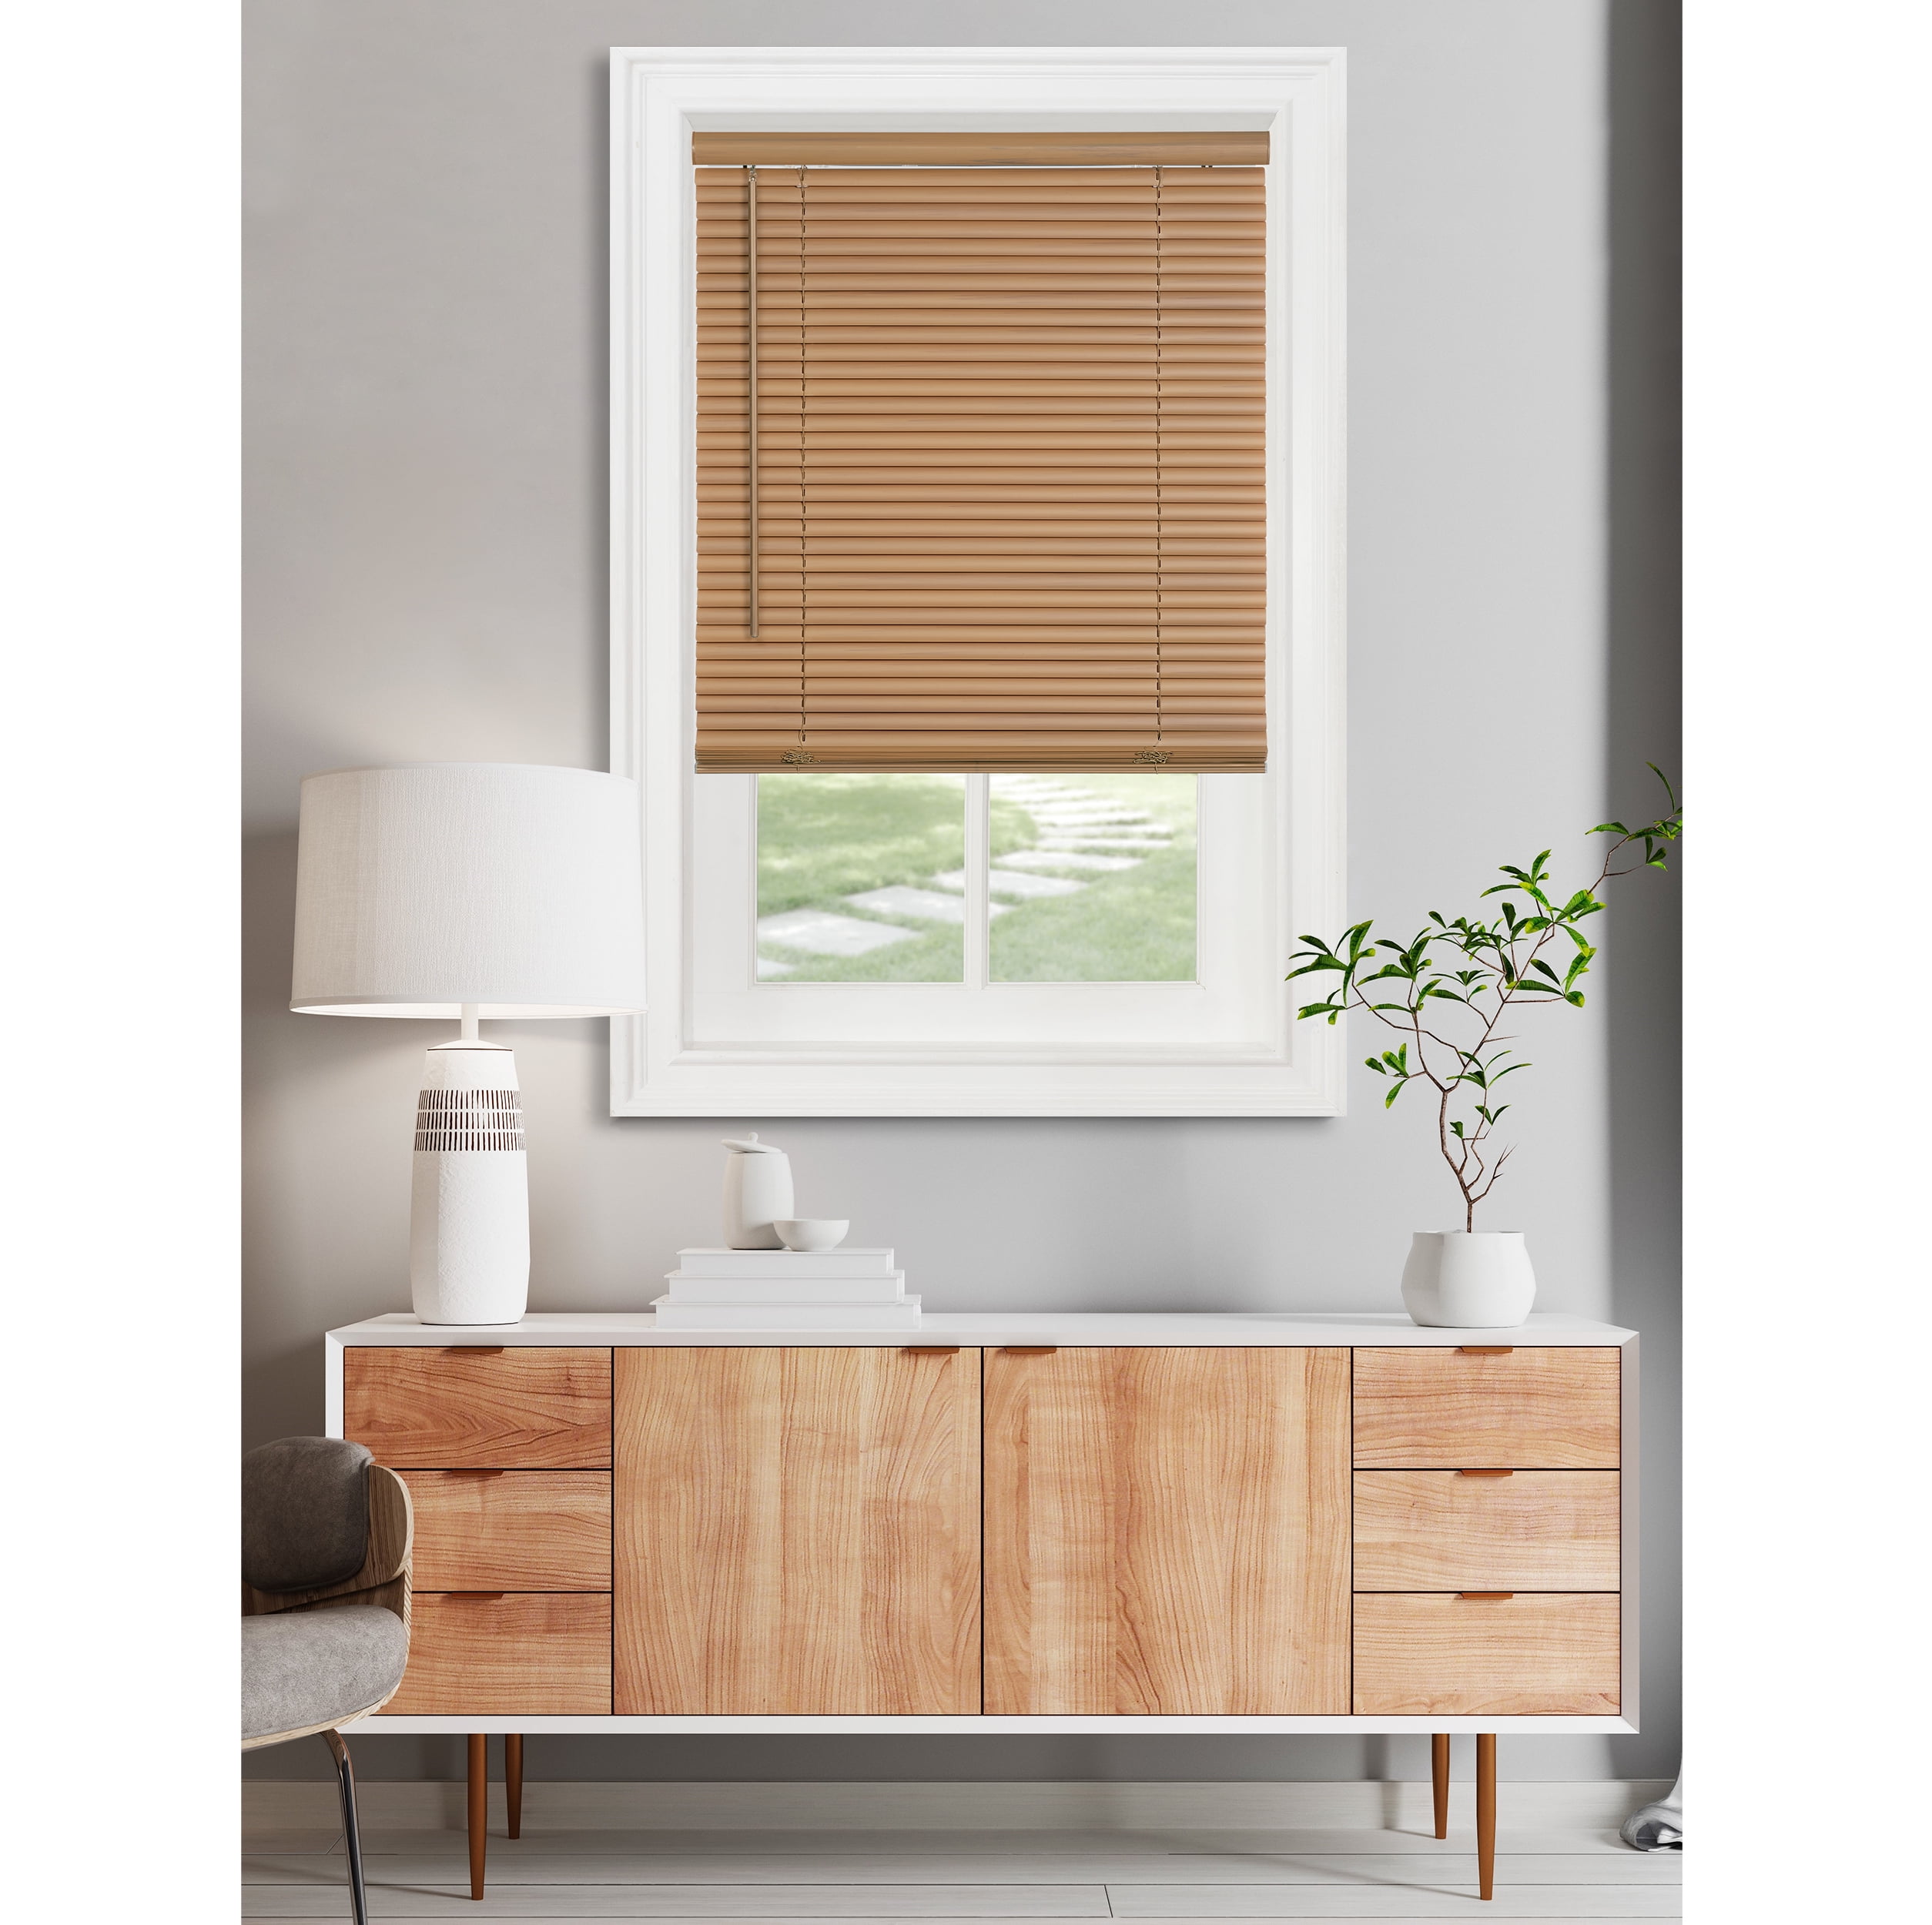 Picture of Achim MSG226WD06 Cordless GII Morningstar 1 in. Light Filtering Mini - Blind 26 x 64 in. - Woodtone